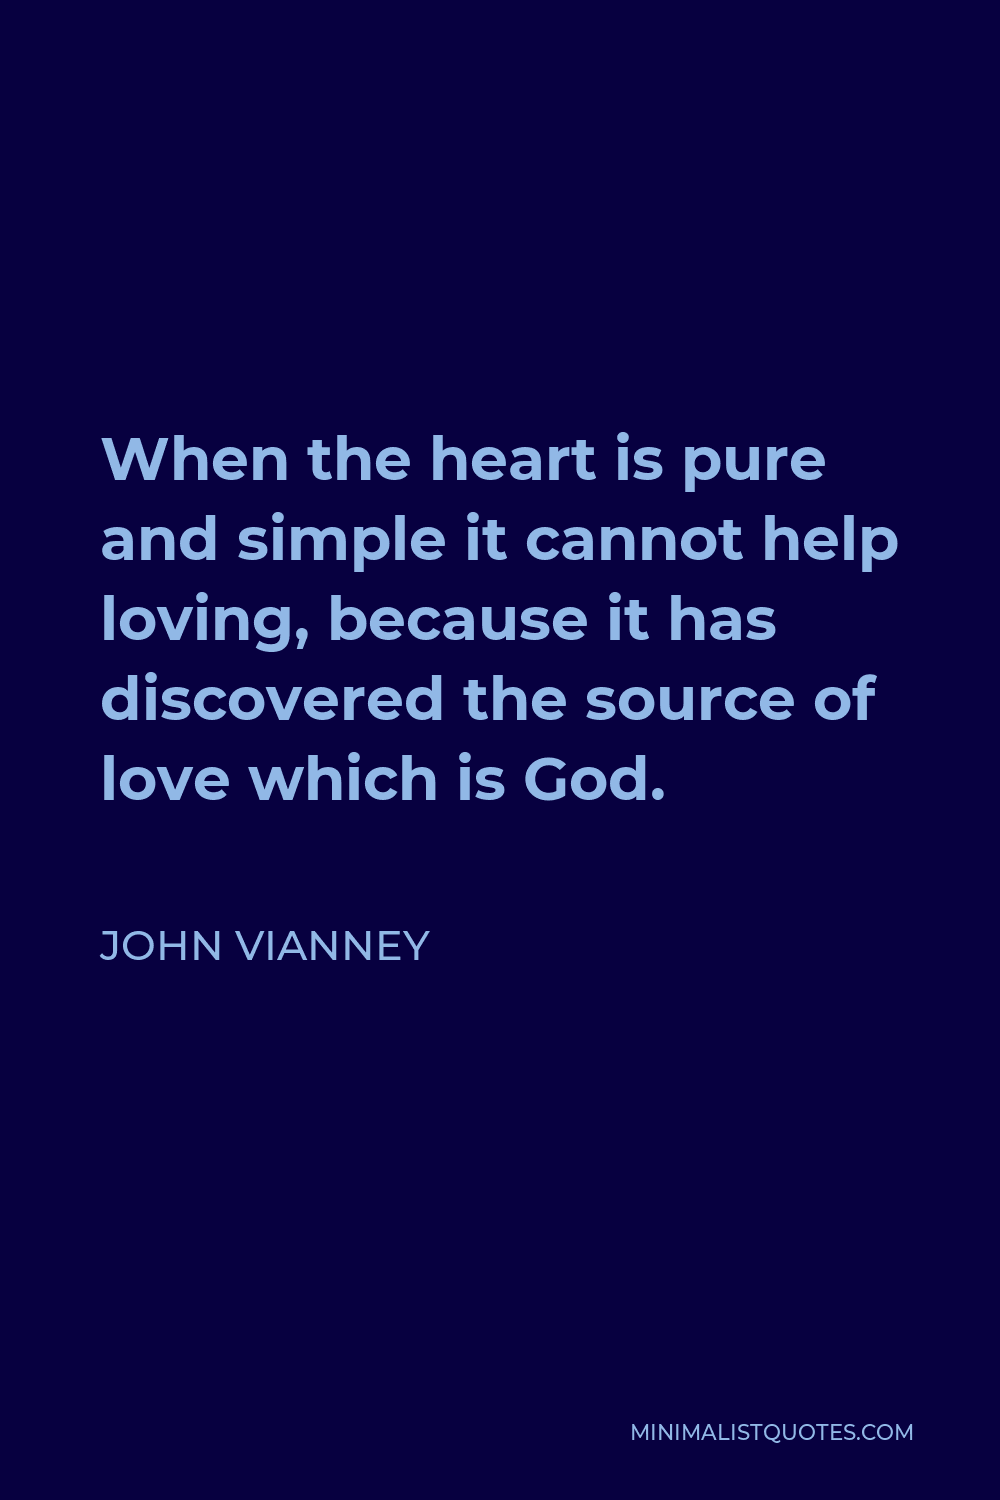 John Vianney Quote - When the heart is pure and simple it cannot help loving, because it has discovered the source of love which is God.